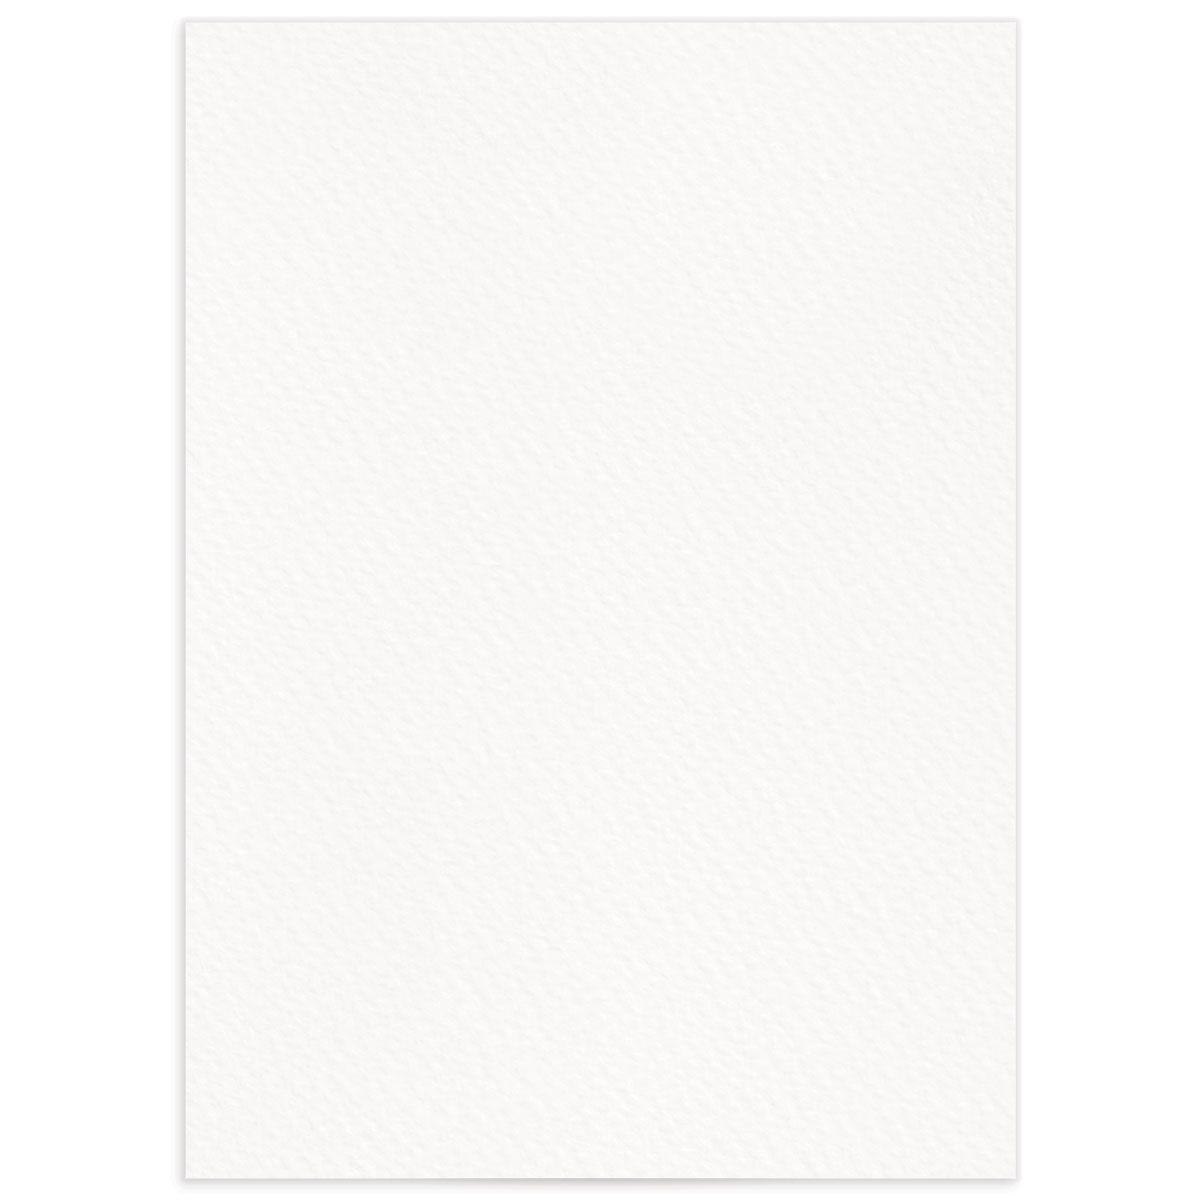 Floral Circles Wedding Response Cards back in White